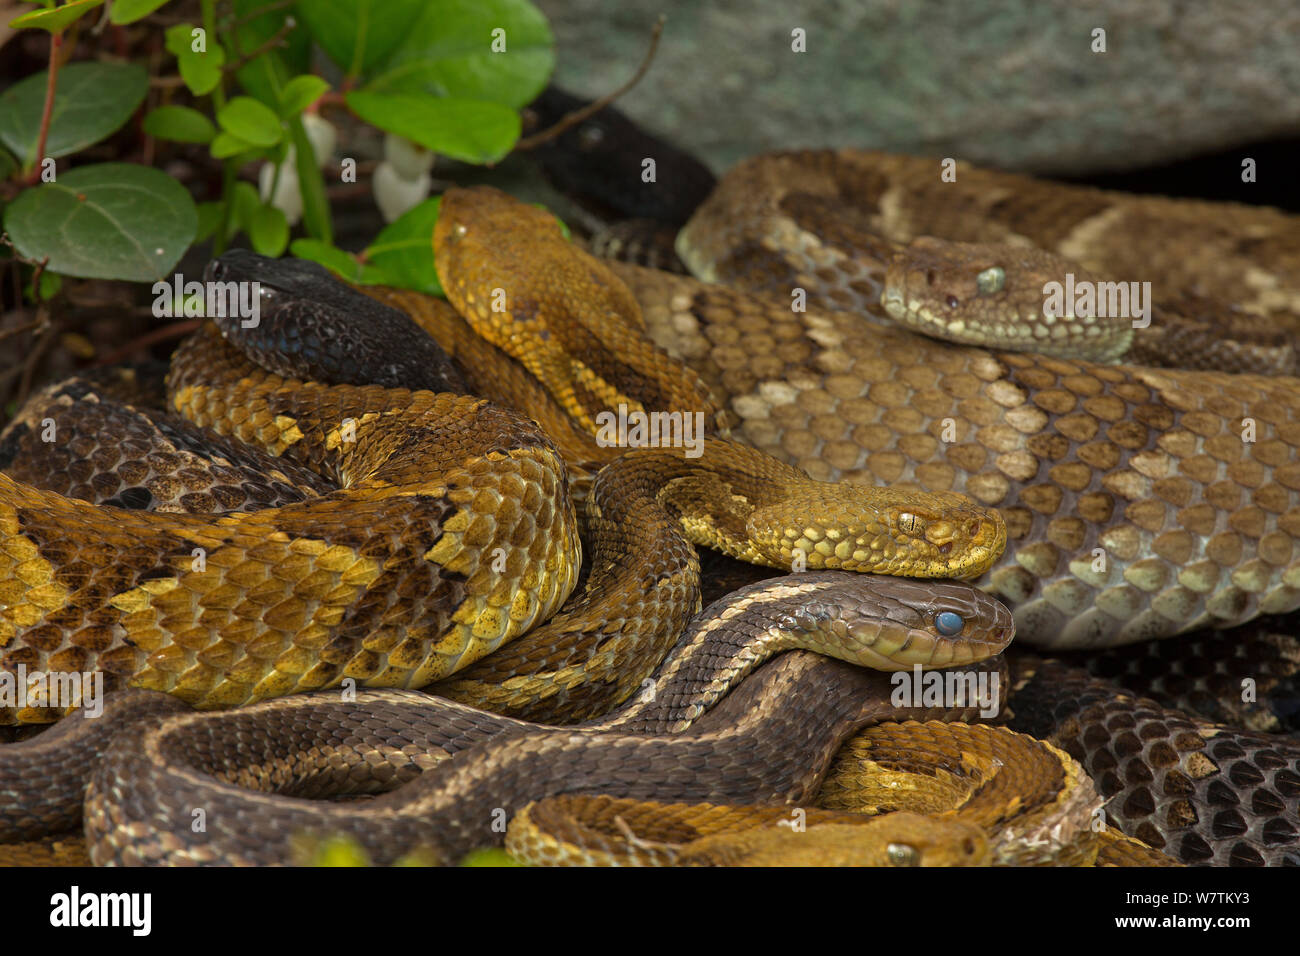 Timber rattlesnakes (Crotalus horridus) gravid females basking with Common gartersnake (Thamnophis sirtalis) also visible in the group. Pennsylvania, USA, July. Stock Photo